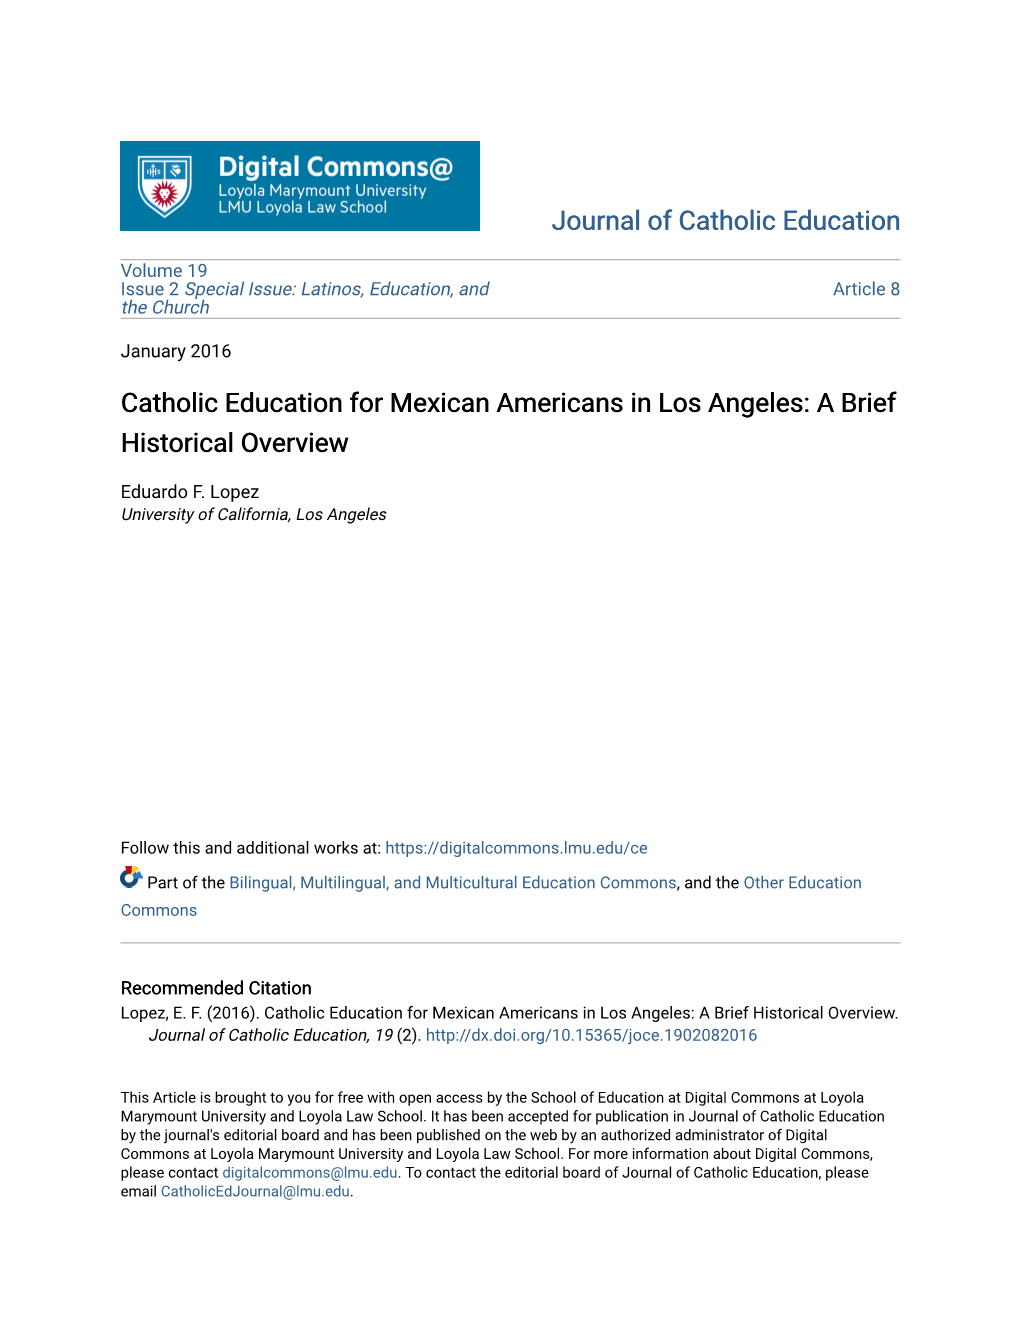 Catholic Education for Mexican Americans in Los Angeles: a Brief Historical Overview